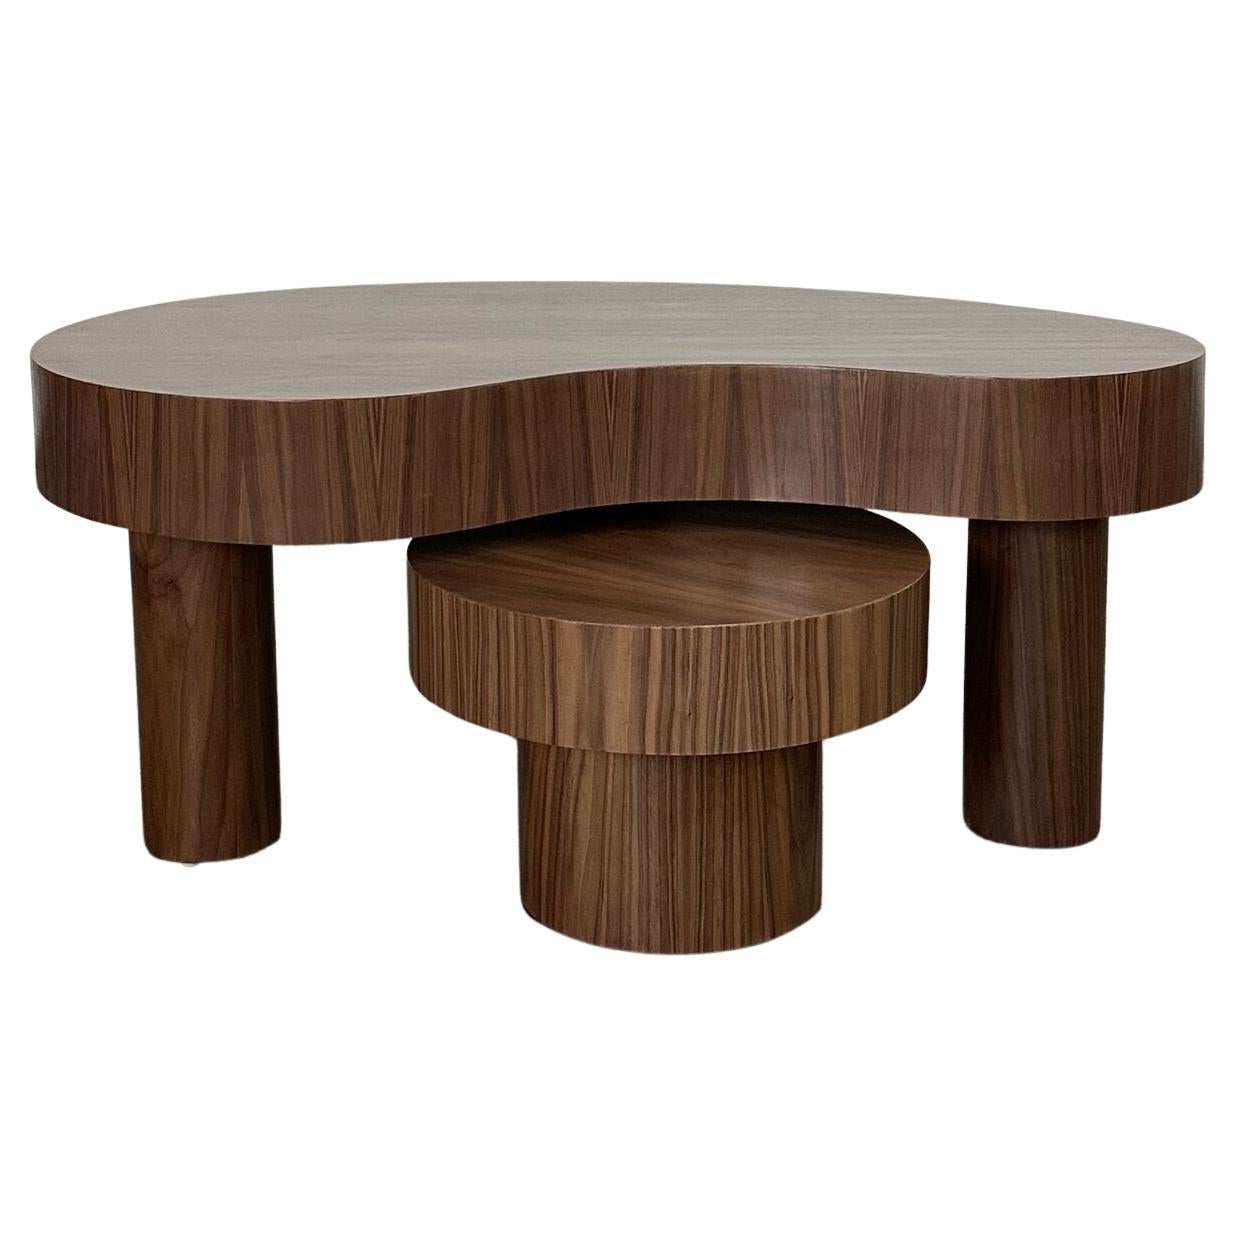 Small Kidney Two Tiered Coffee Table Set- Walnut For Sale